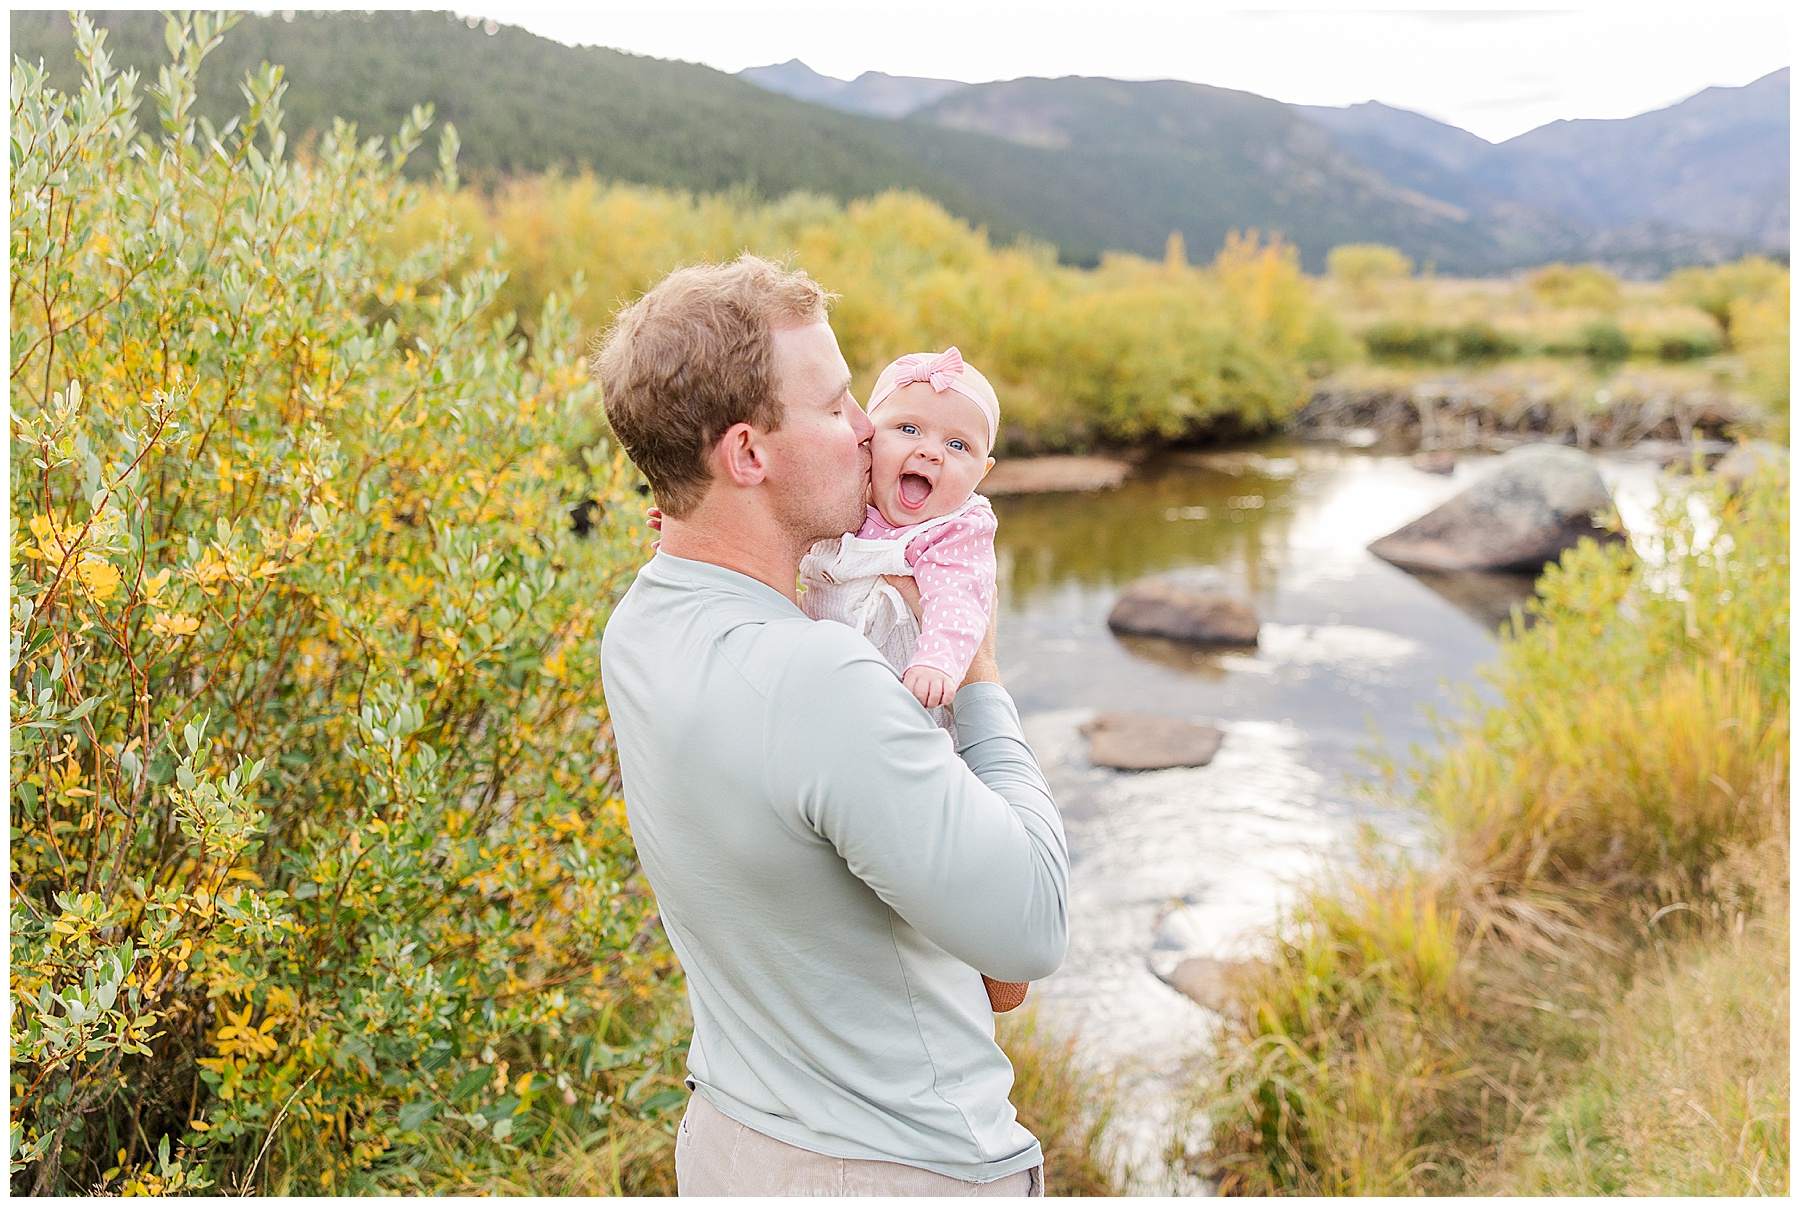 daddy kisses baby girl on the cheek with a pond in the background